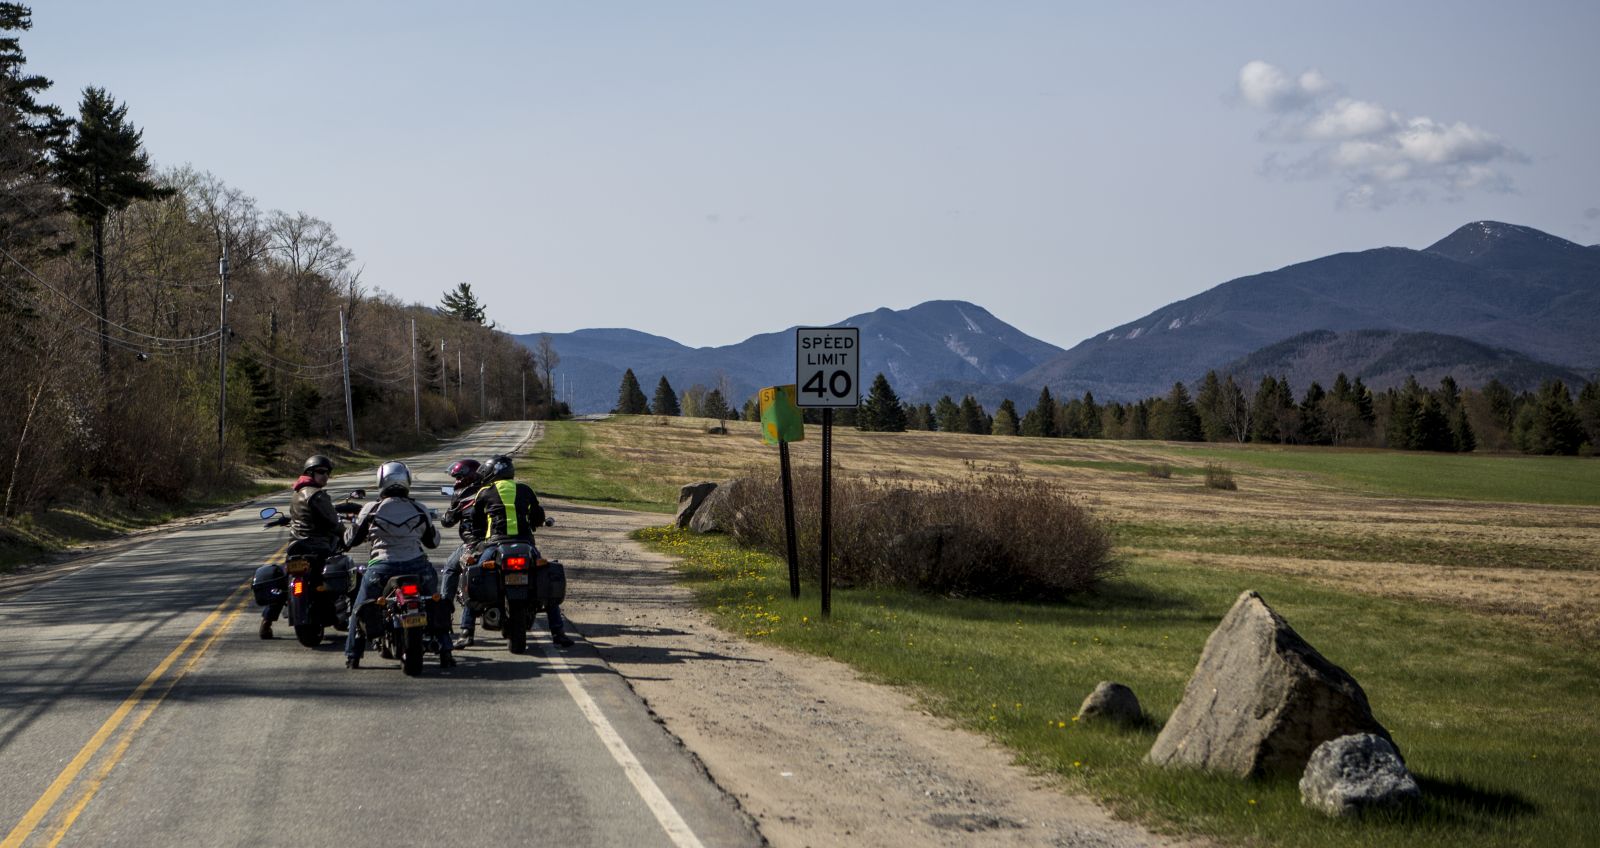 Take this scenic detour and you'll end up at the ADK Loj!